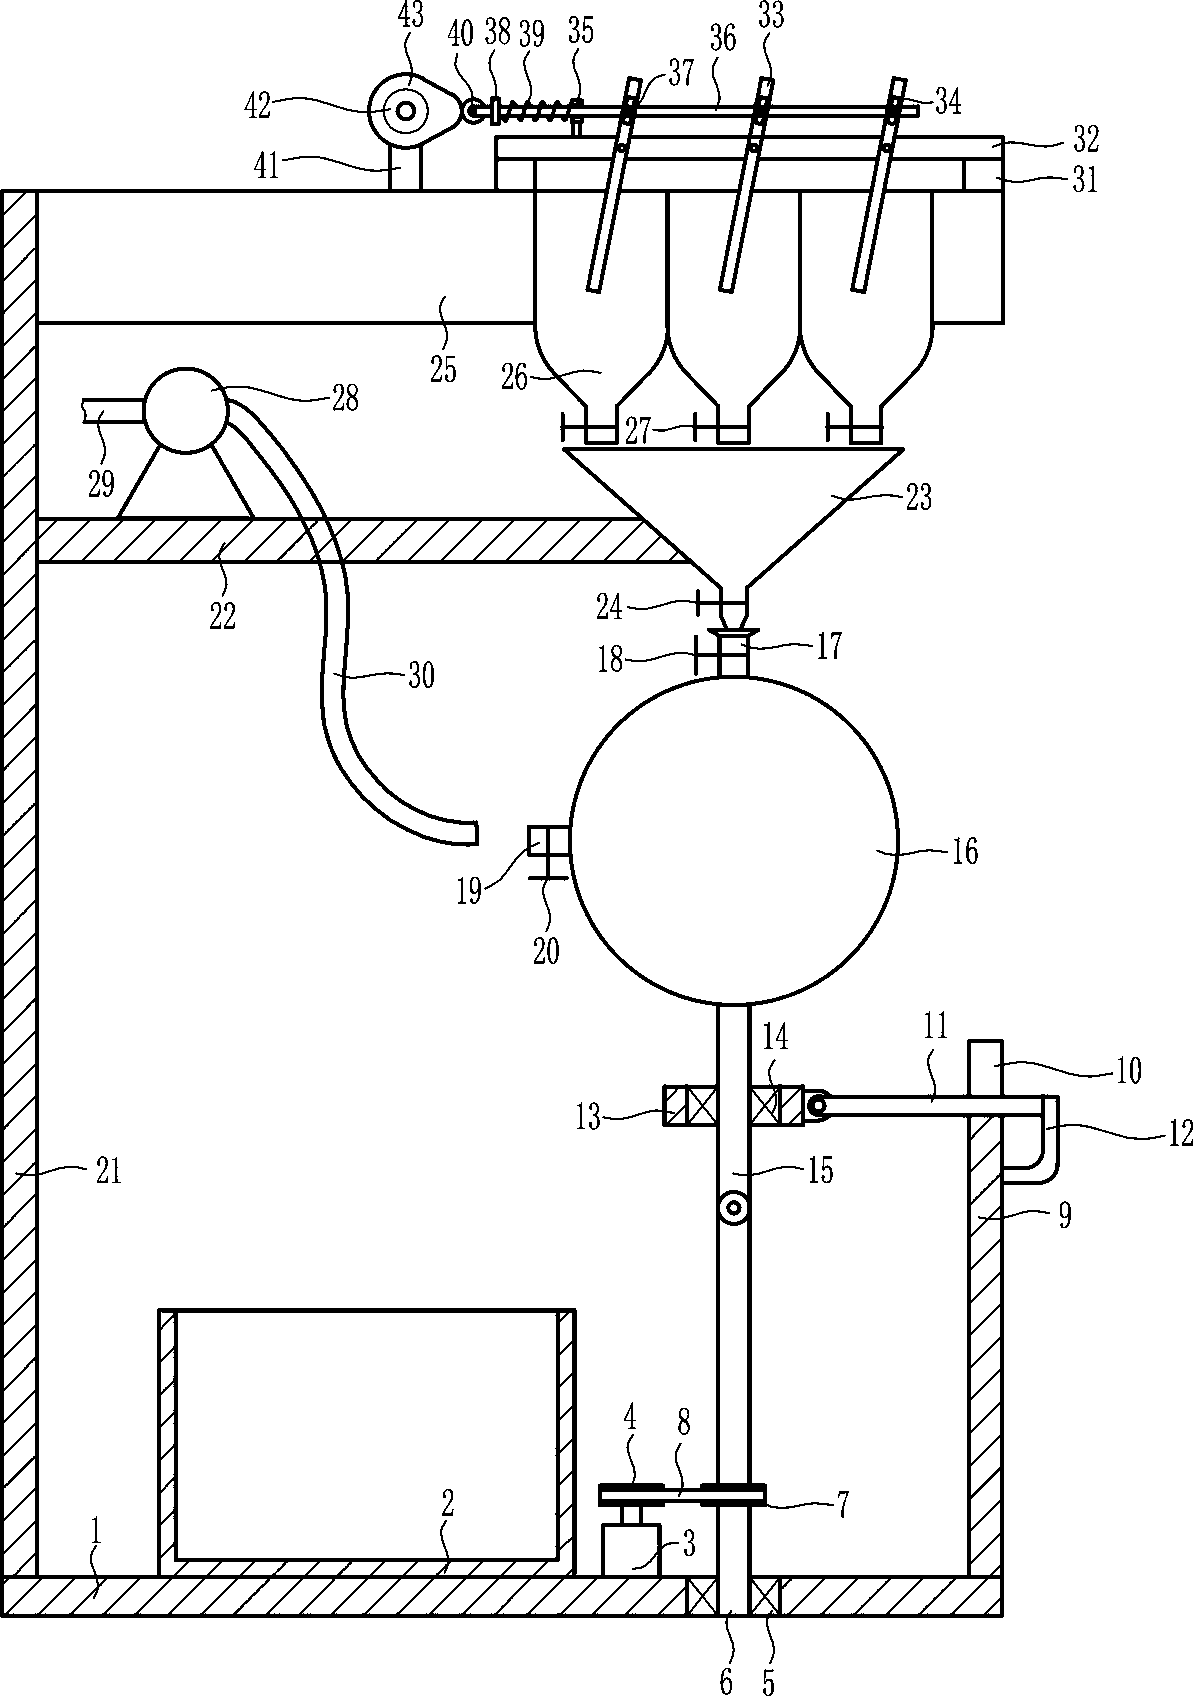 Medical nutrient solution stirring device